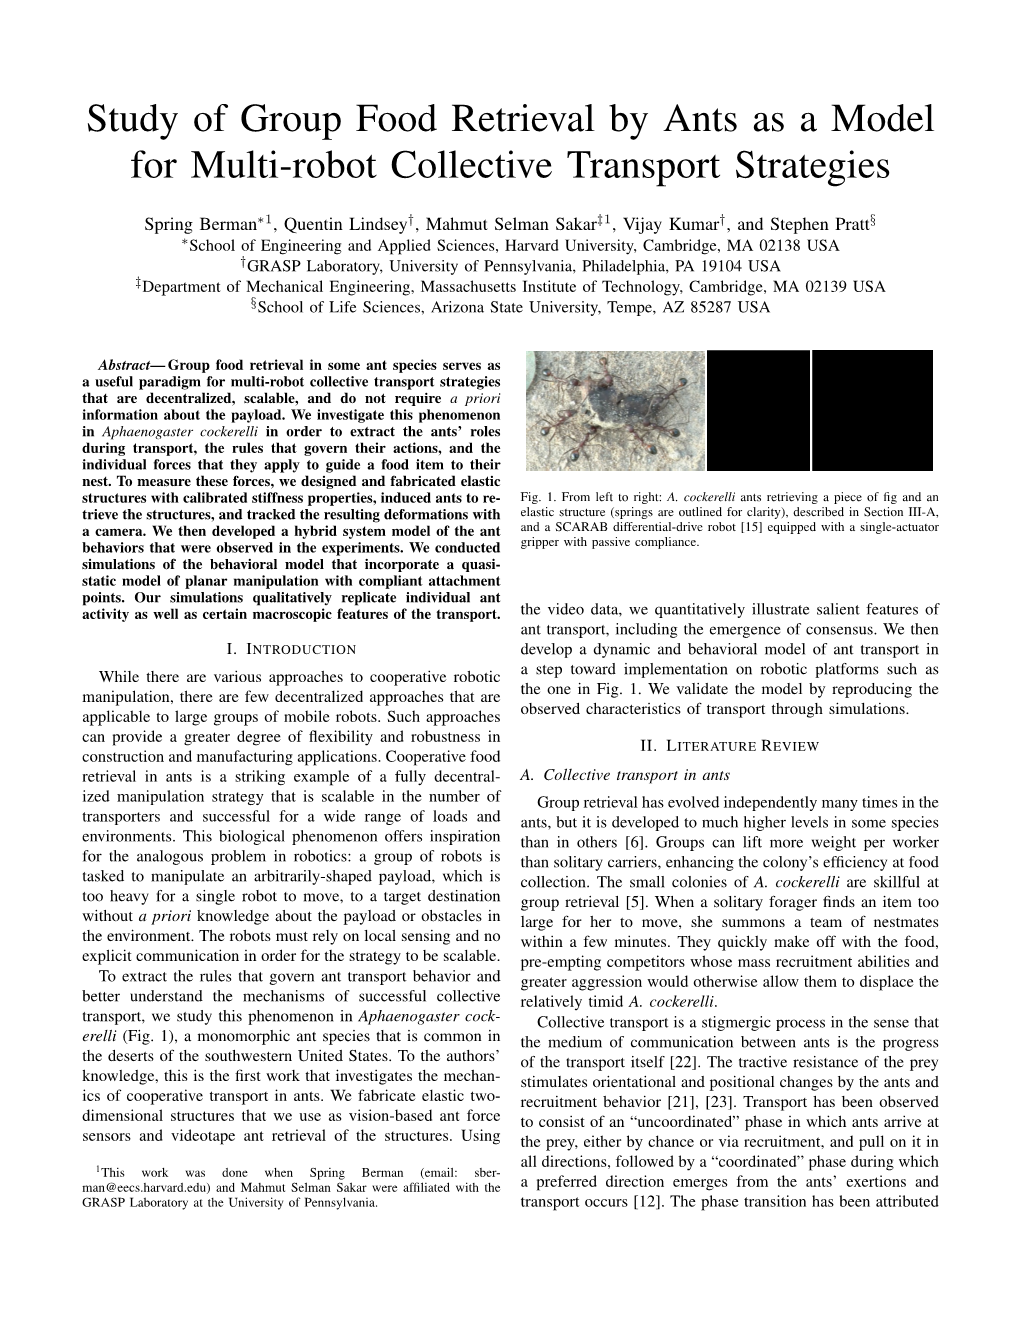 Study of Group Food Retrieval by Ants As a Model for Multi-Robot Collective Transport Strategies